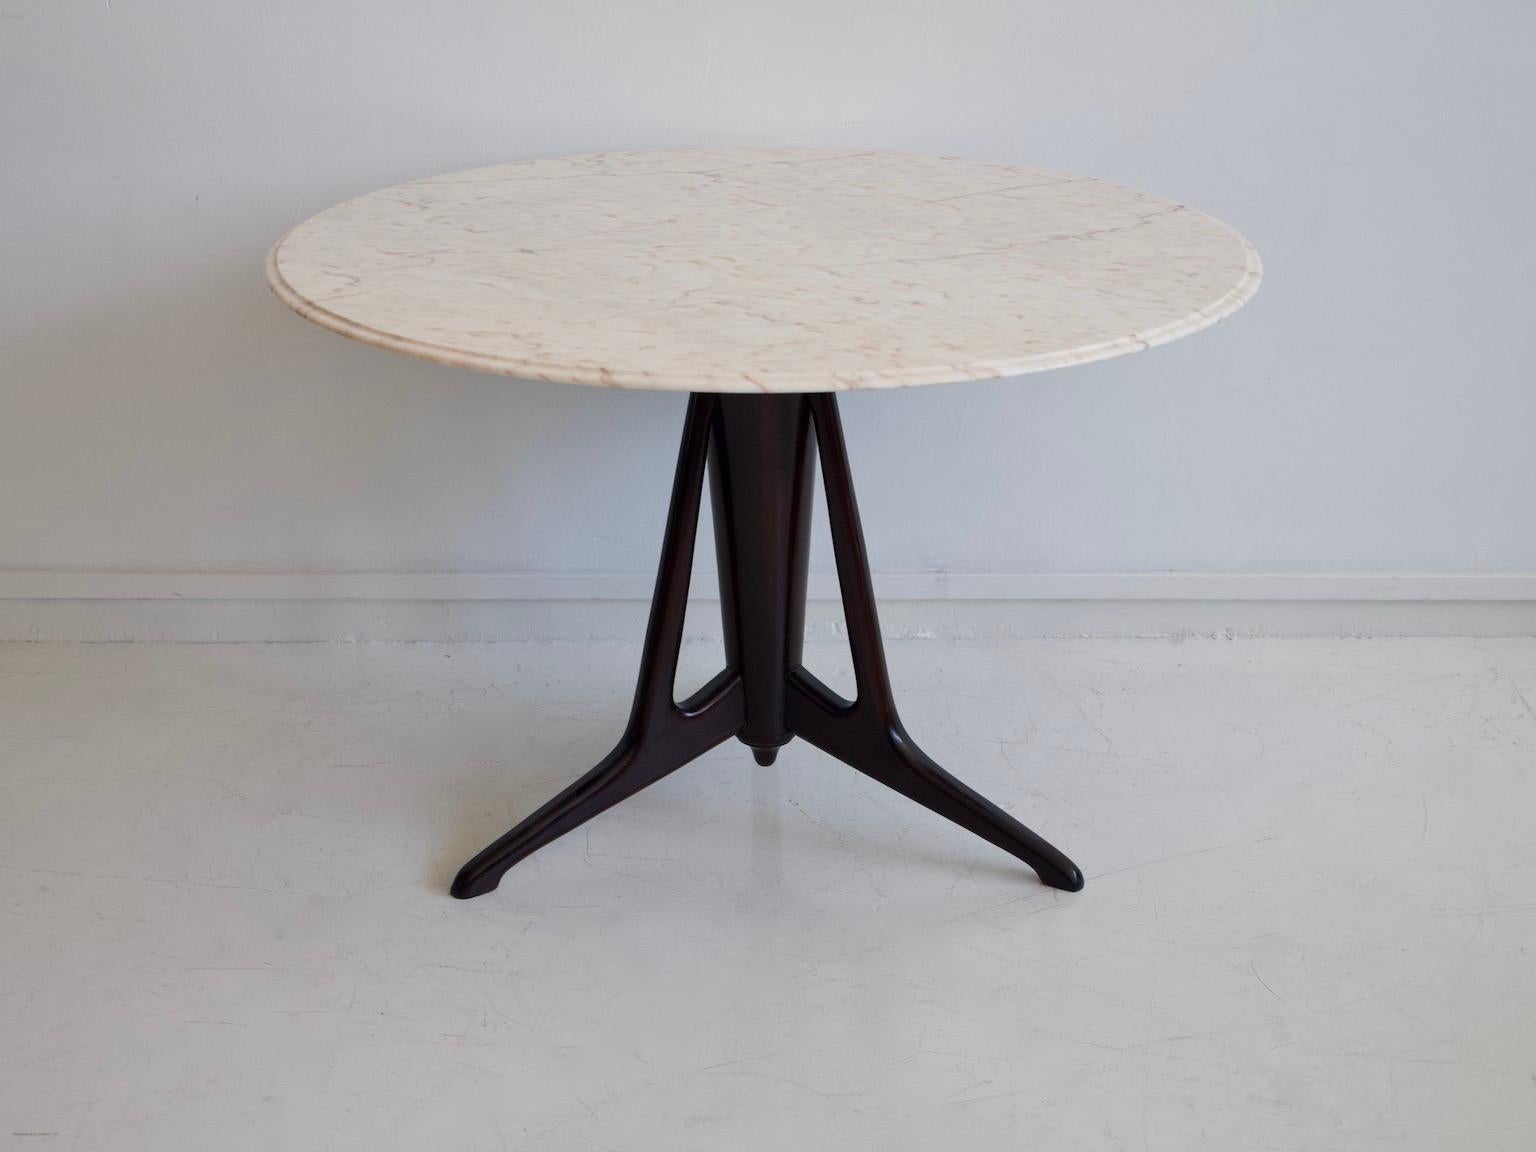 Italian Midcentury Modern Round Marble and Ebonized Wood Dining Table For Sale